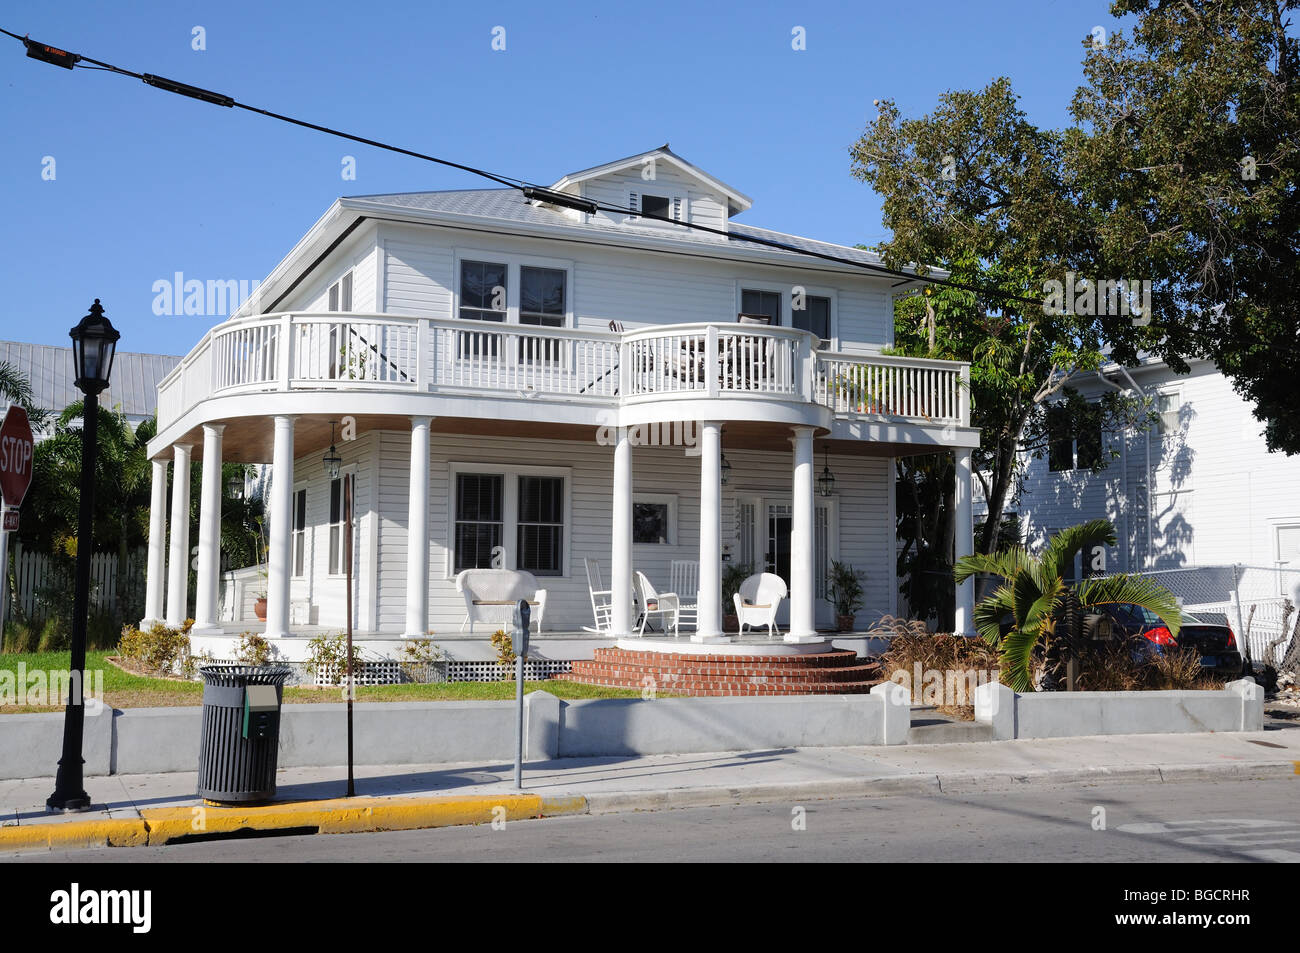 Typical House at Key West, Florida USA Stock Photo